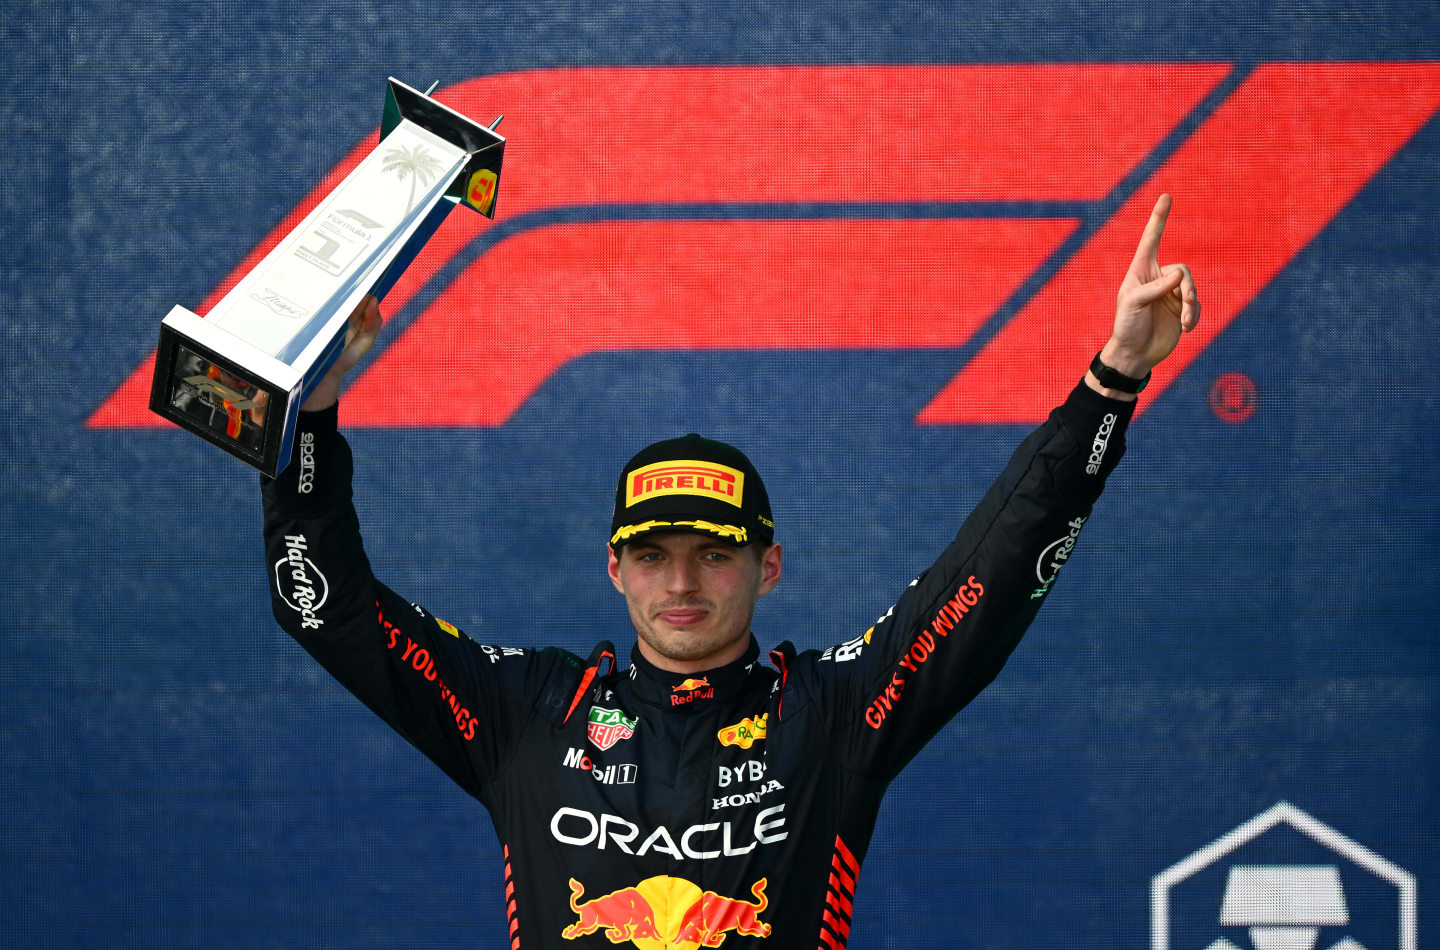 MIAMI, FLORIDA - MAY 07: Race winner Max Verstappen of the Netherlands and Oracle Red Bull Racing celebrates on the podium during the F1 Grand Prix of Miami at Miami International Autodrome on May 07, 2023 in Miami, Florida. (Photo by Clive Mason - Formula 1/Formula 1 via Getty Images)